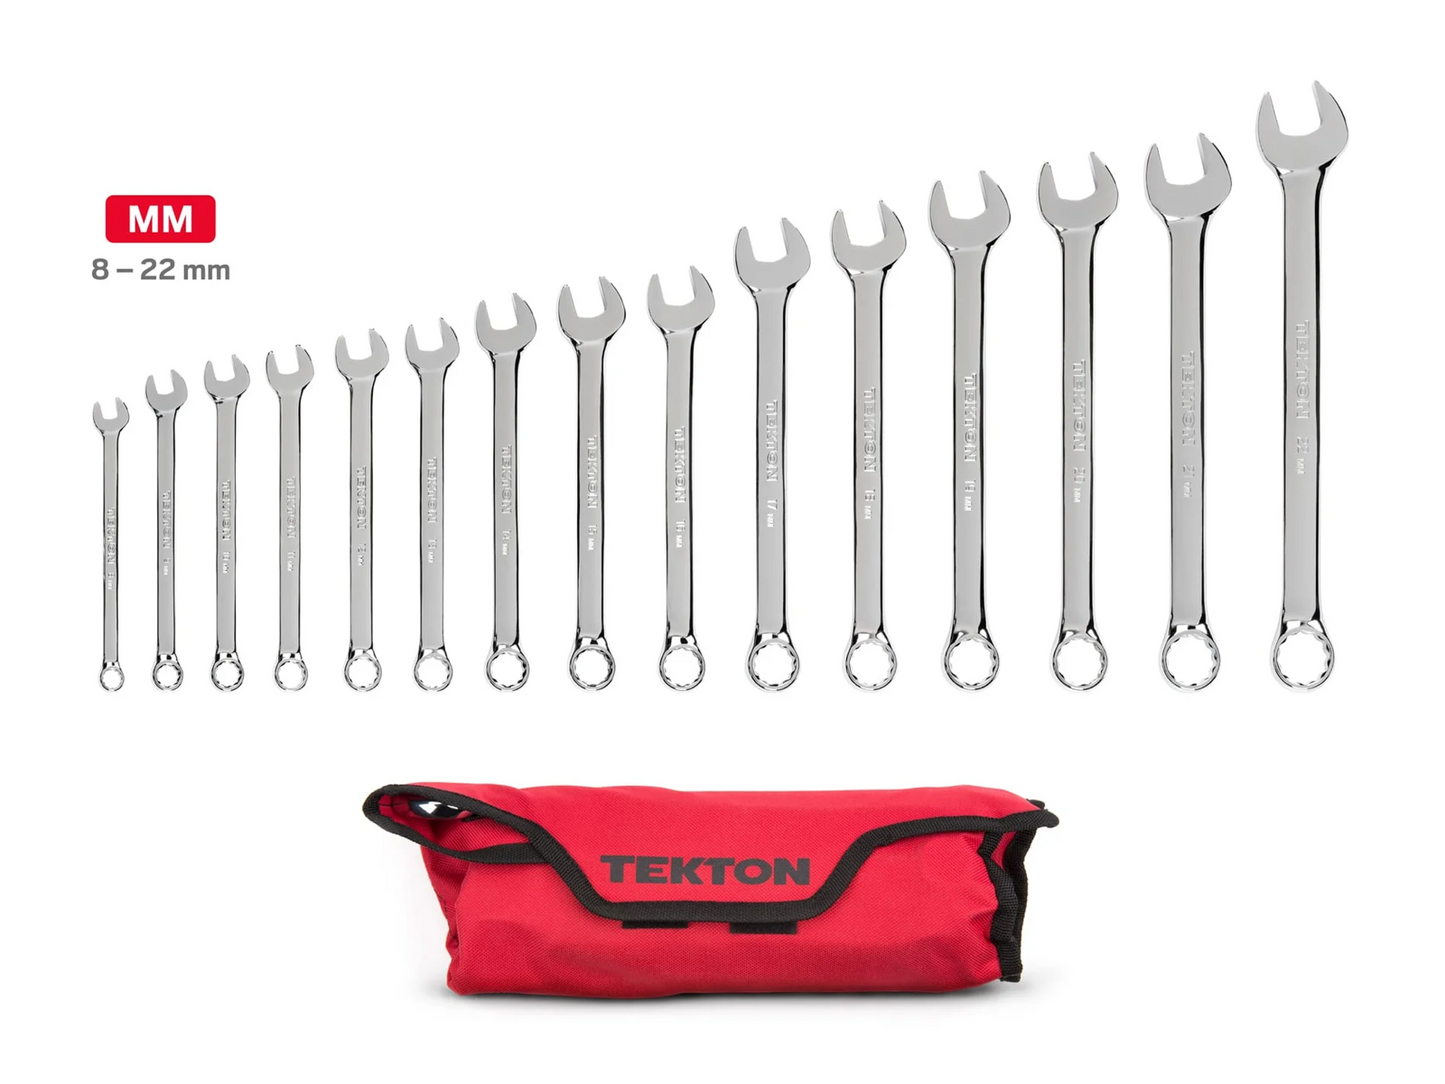 Tekton Combination Wrench Set, 15-Piece (8-22 mm) with Pouch (WRN03393)